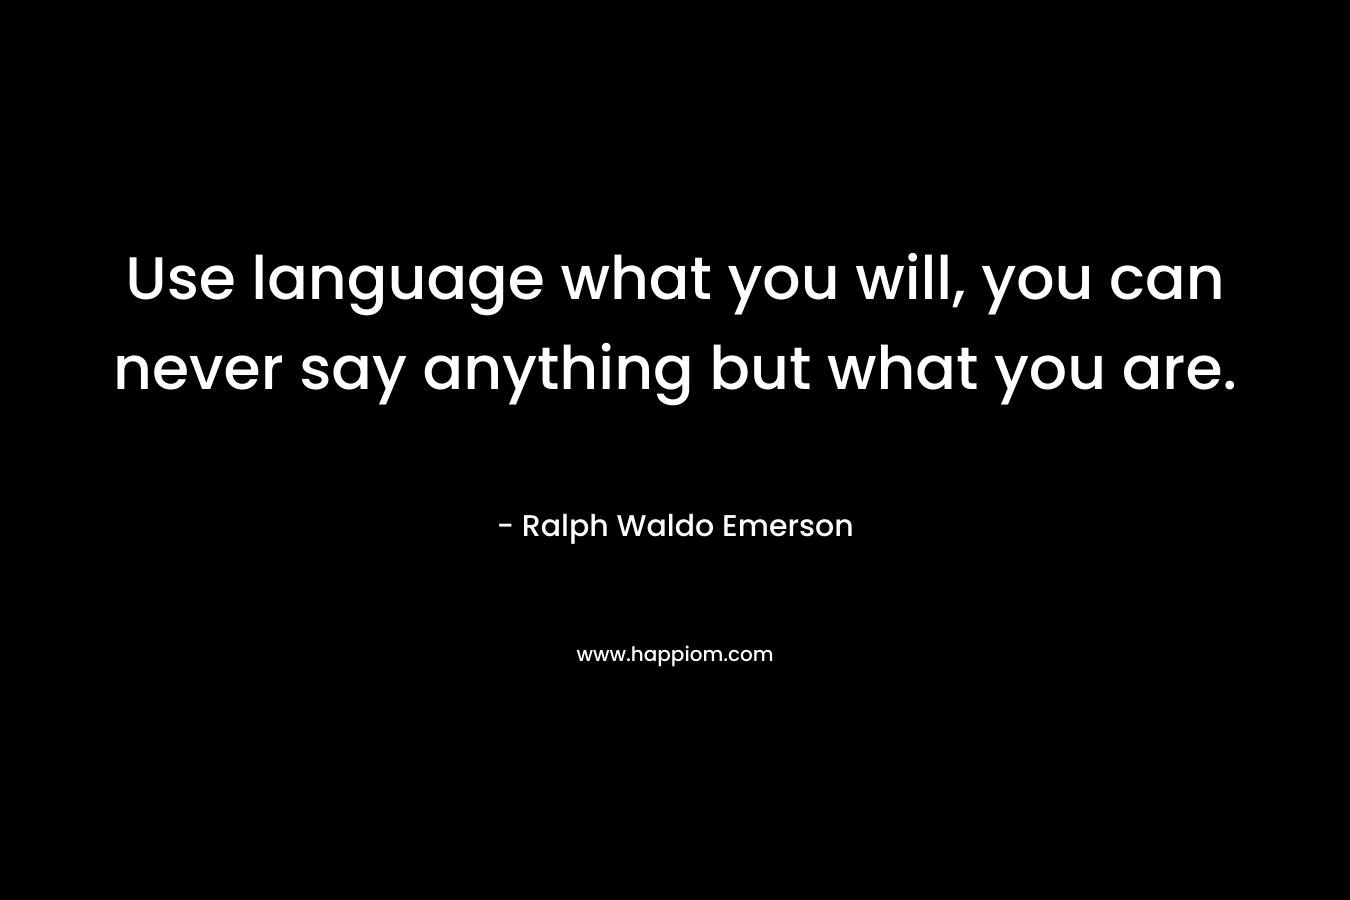 Use language what you will, you can never say anything but what you are.